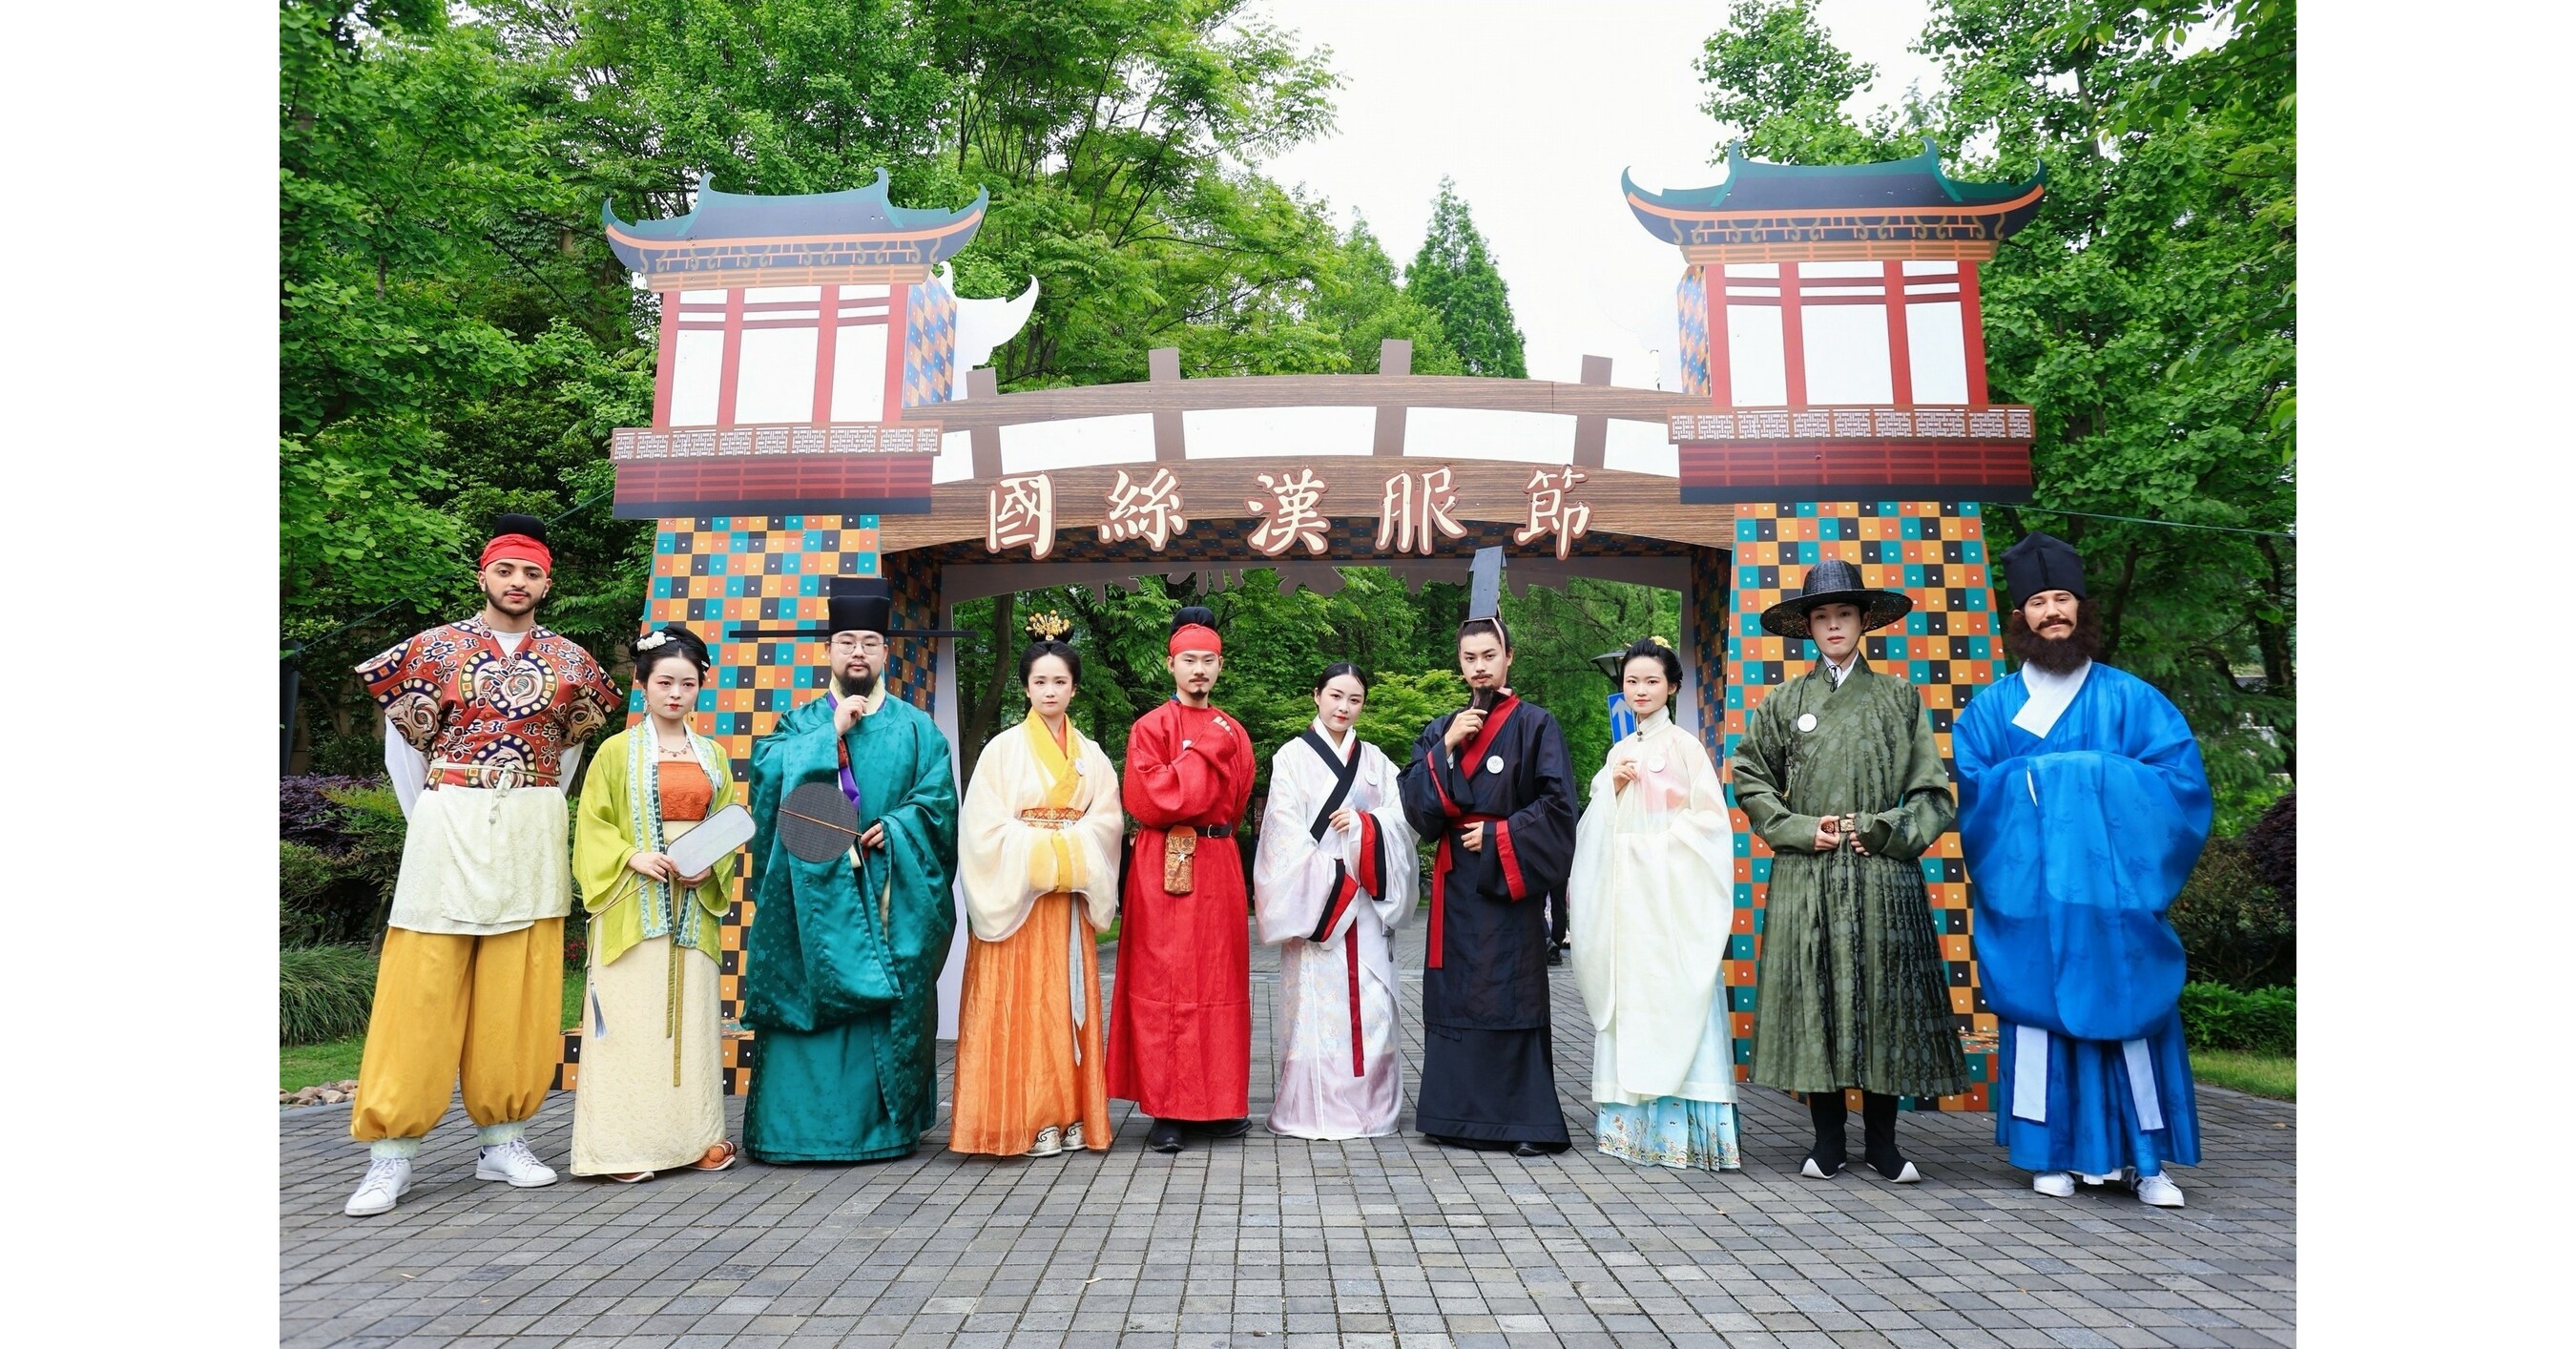 Seventh Annual Chinese Costume Festival Merges Hanfu Tradition with Contemporary Fashion